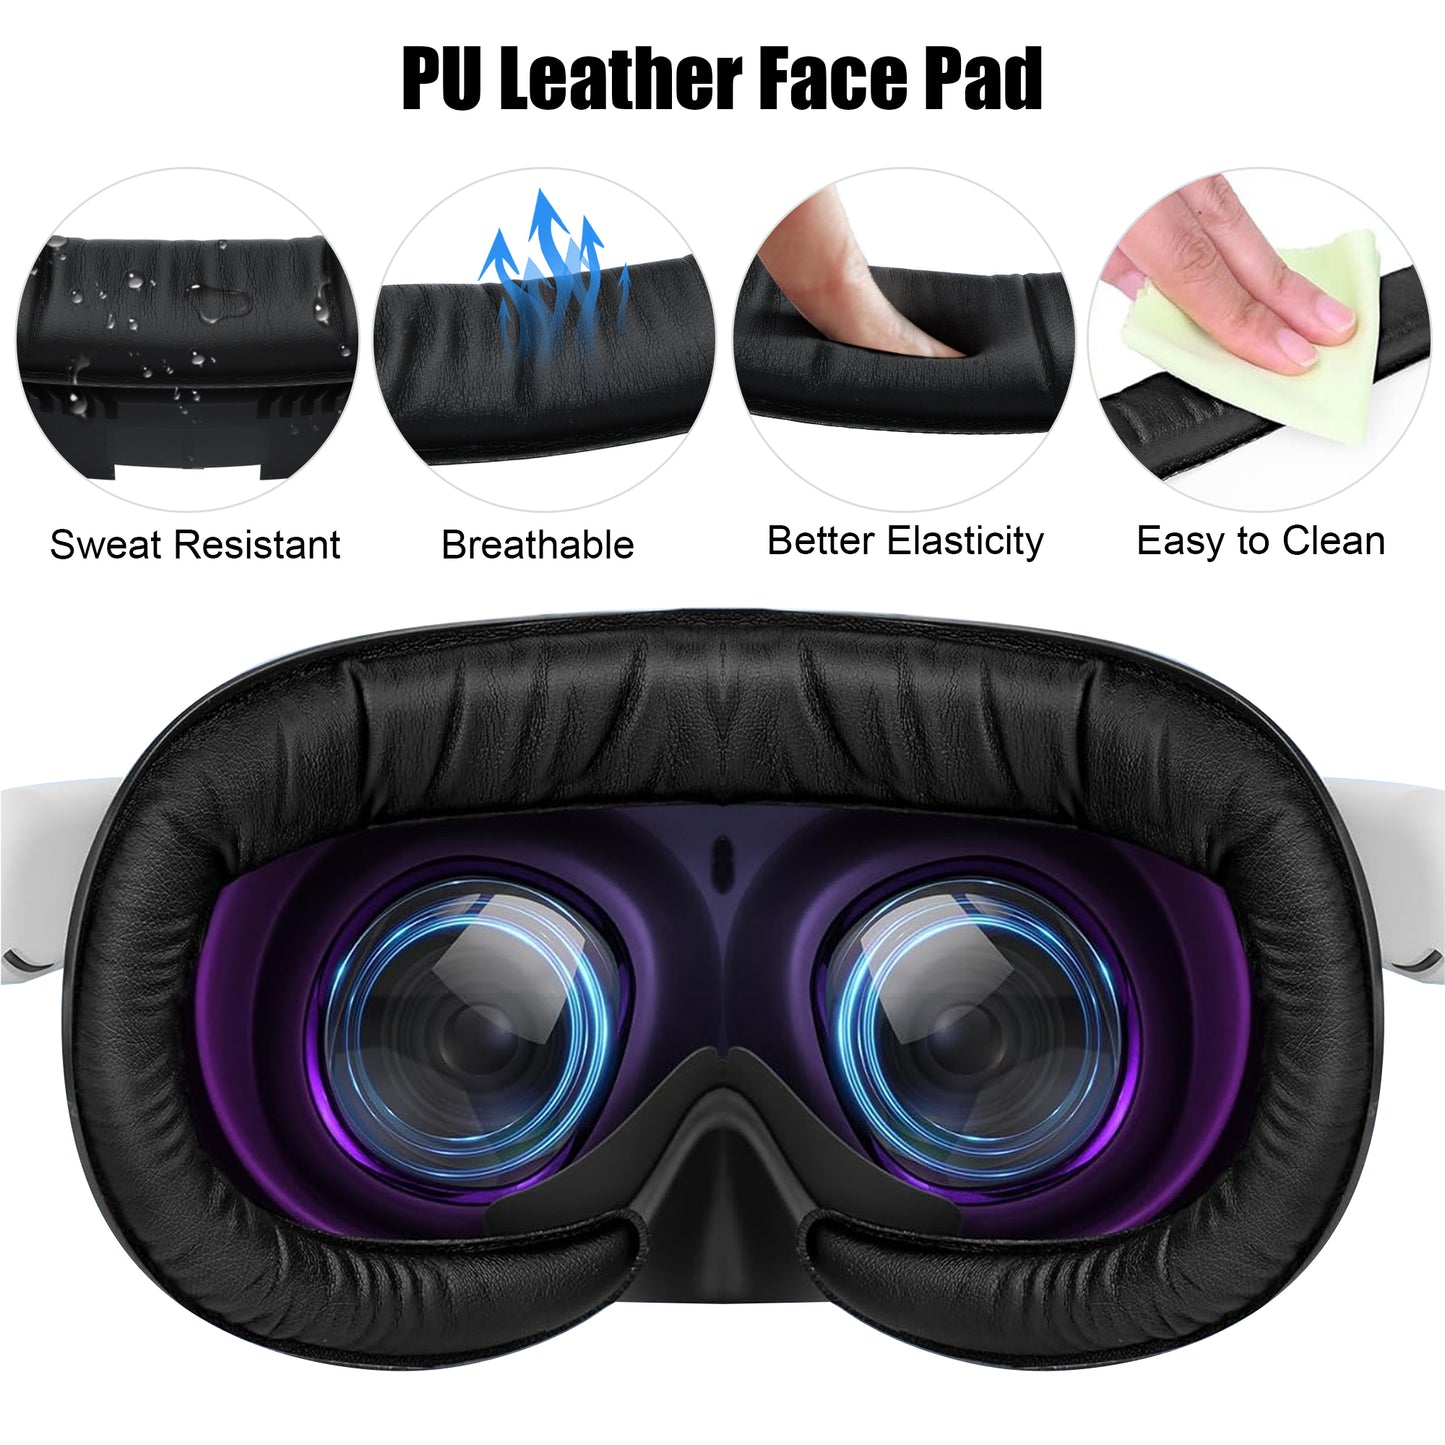 Widened Facial interface Pad Replacement for Meta Quest 3 - PU Foam Cushion Anti Leakage Light Nose Pad and Lens Protector,Air-Circulation Design (Black)